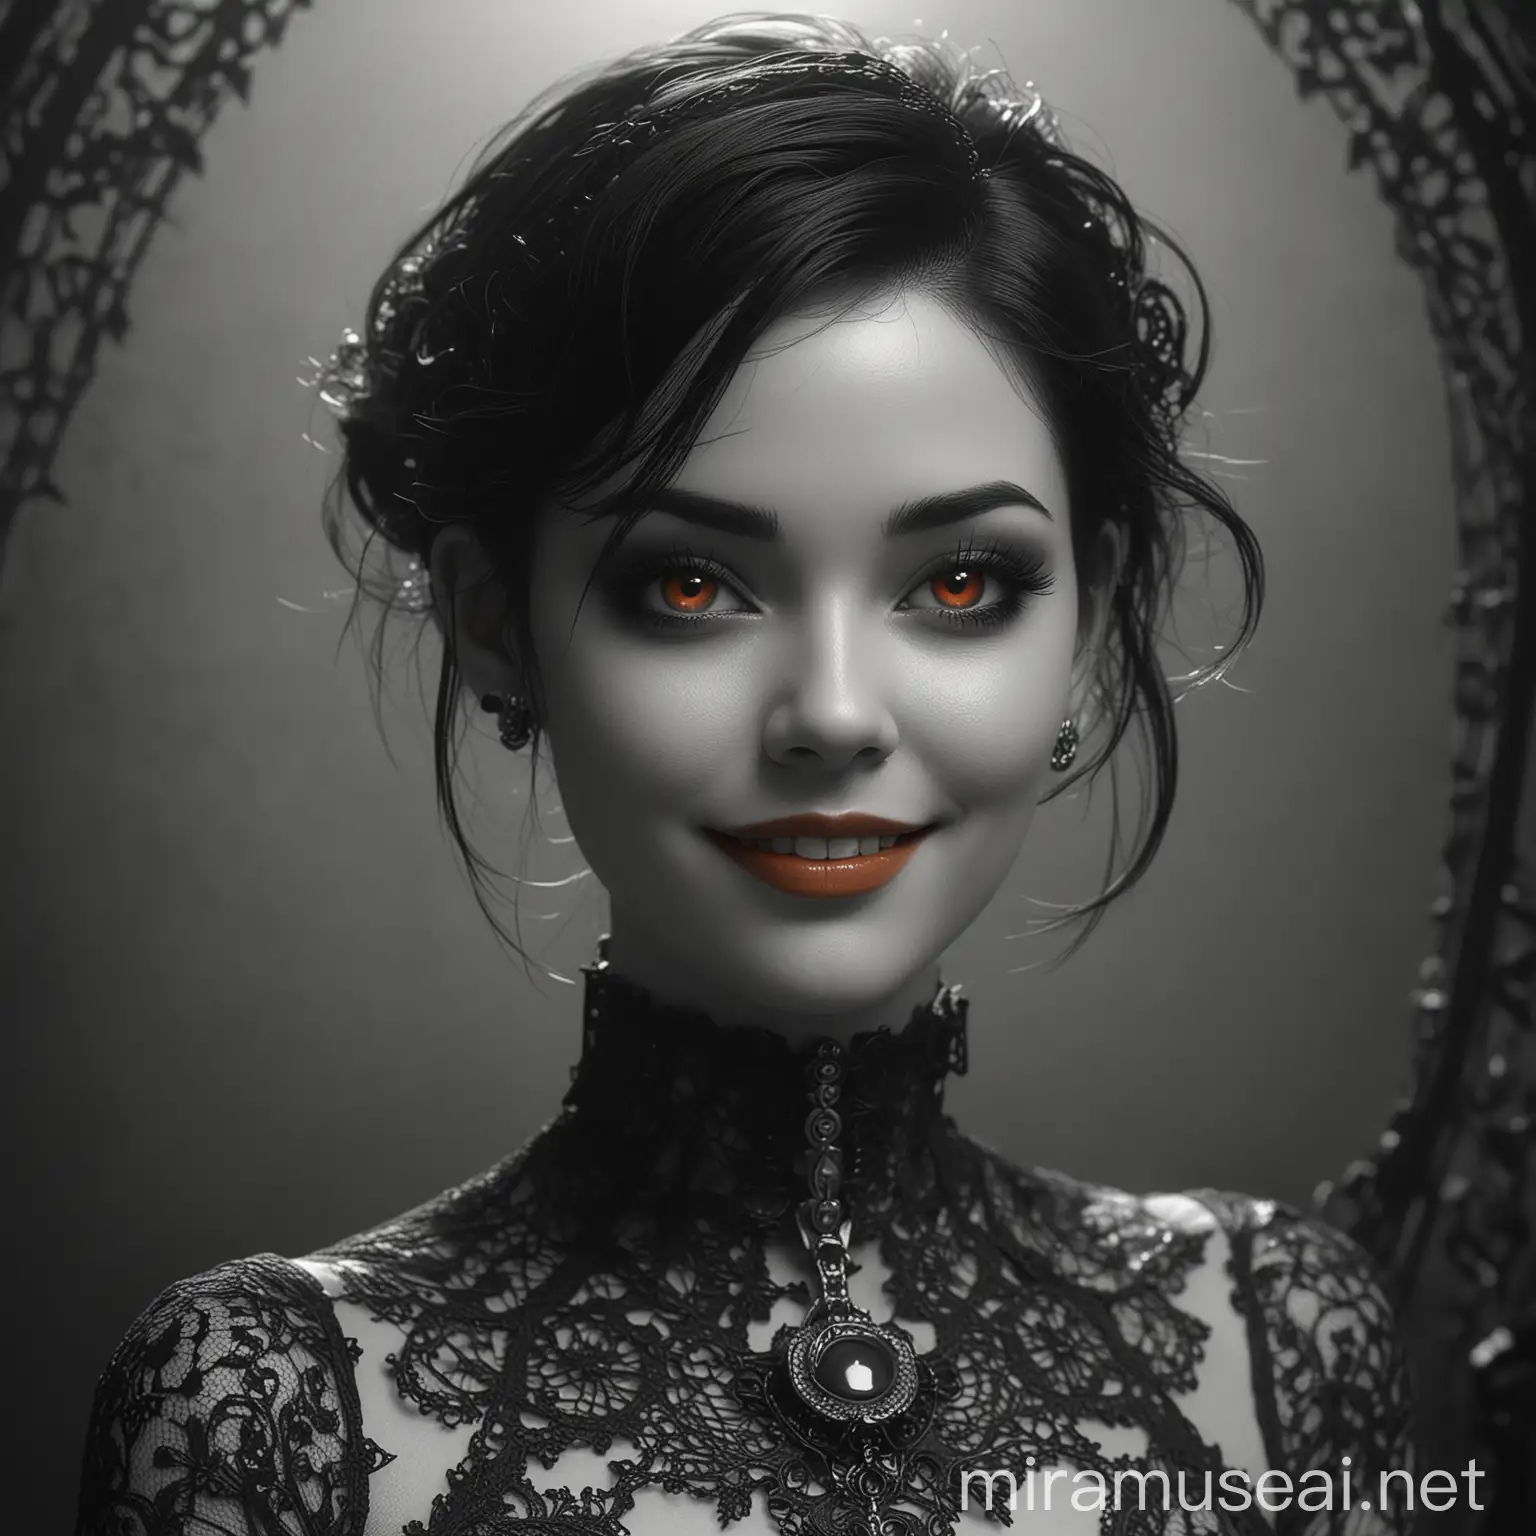 Gothic Beauty Smiling in Lace Queen of Darkness with Grey Eyes in Retro Bauhaus Style